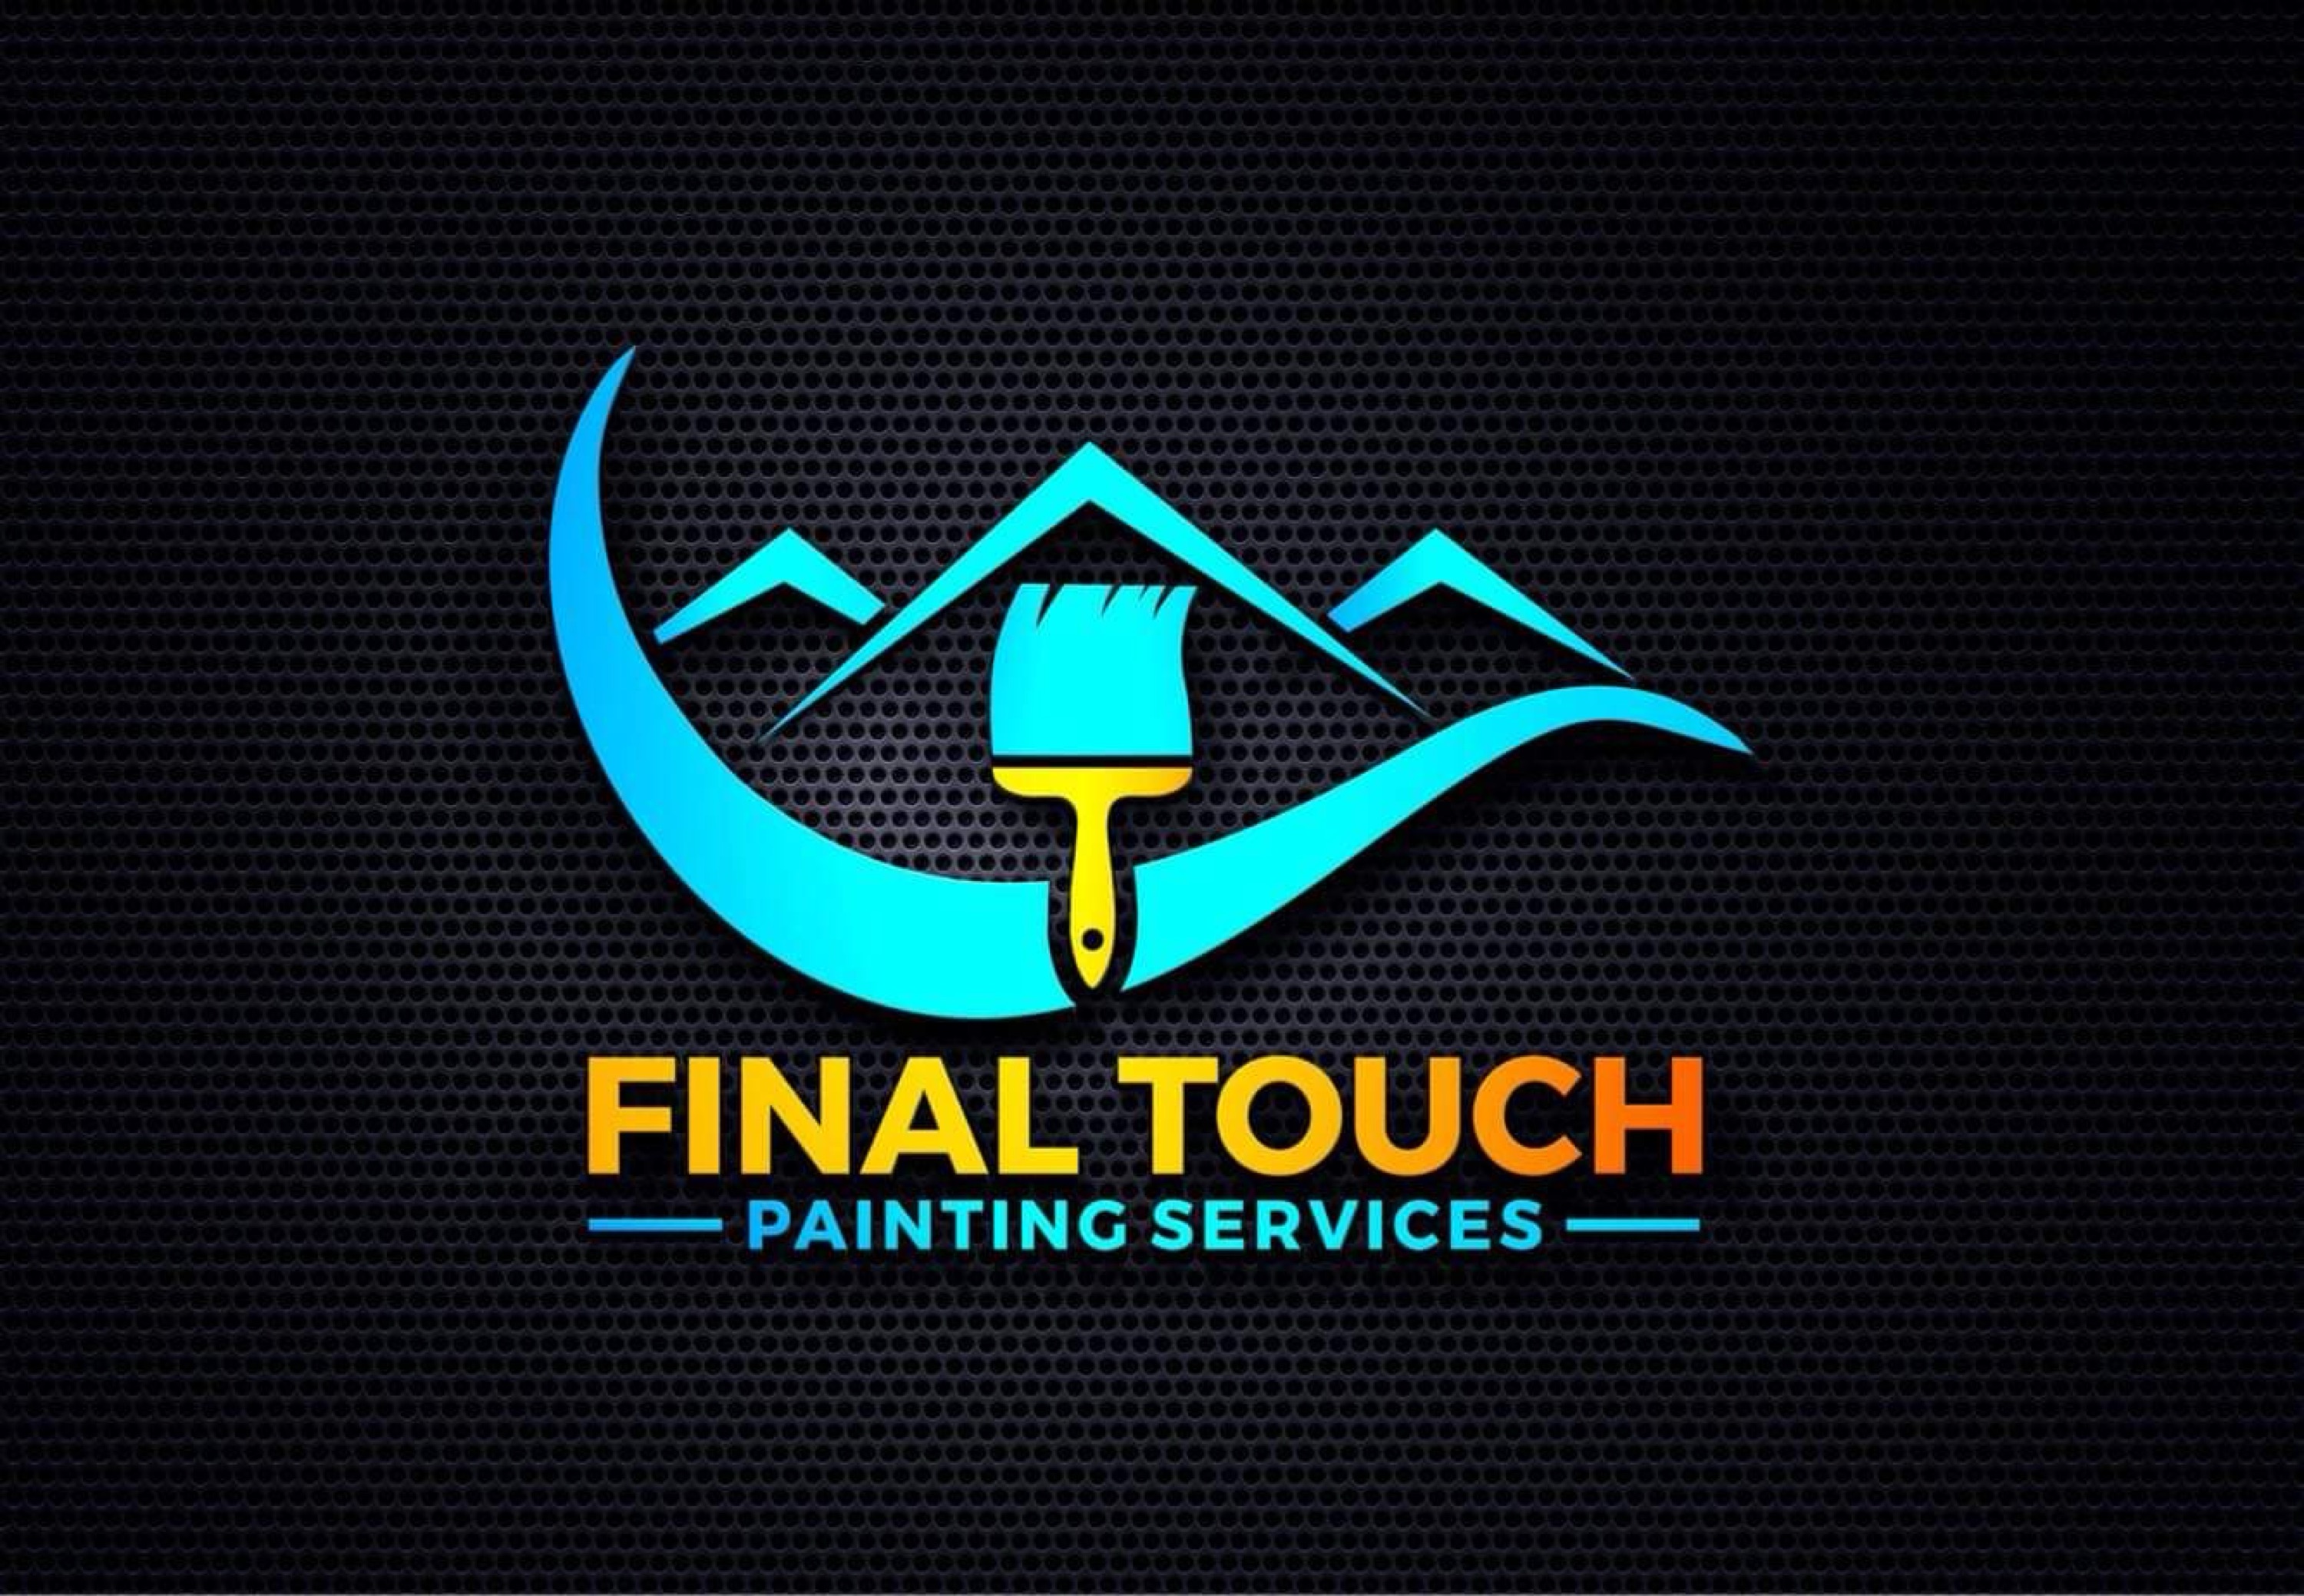 FINAL TOUCH PAINTING SERVICES Logo